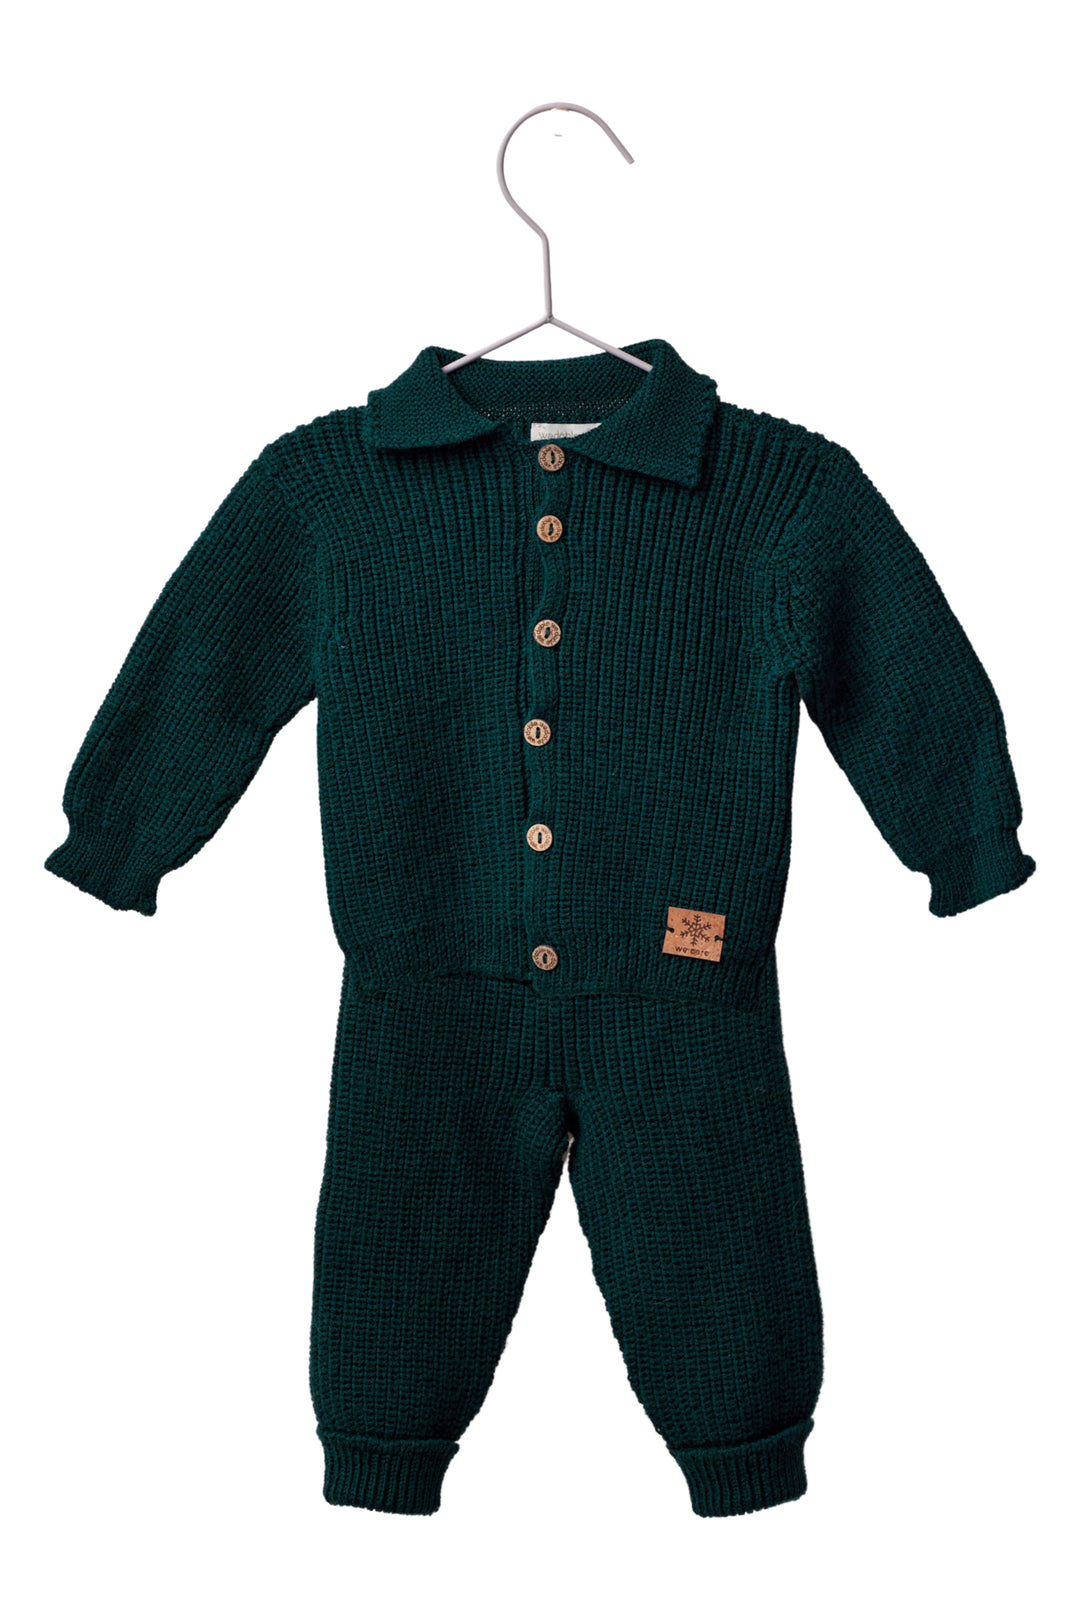 Wedoble "Niall" Green Knit Wool Top & Trousers | Millie and John